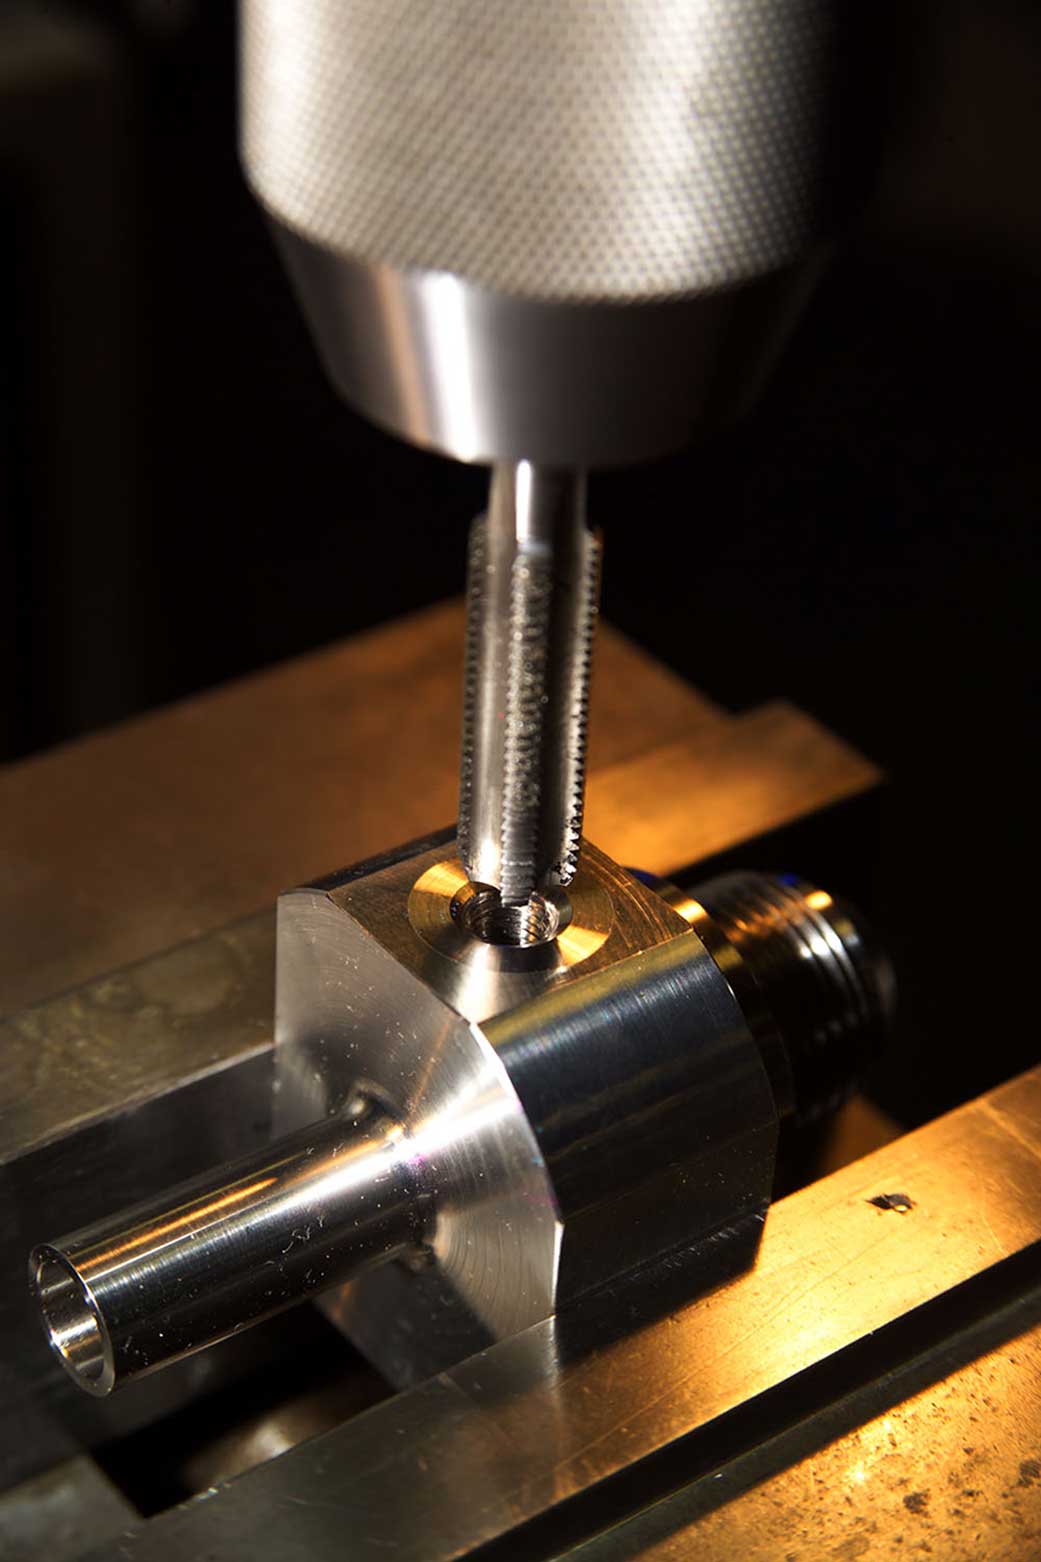 Machining intricate parts is one of our specialties.